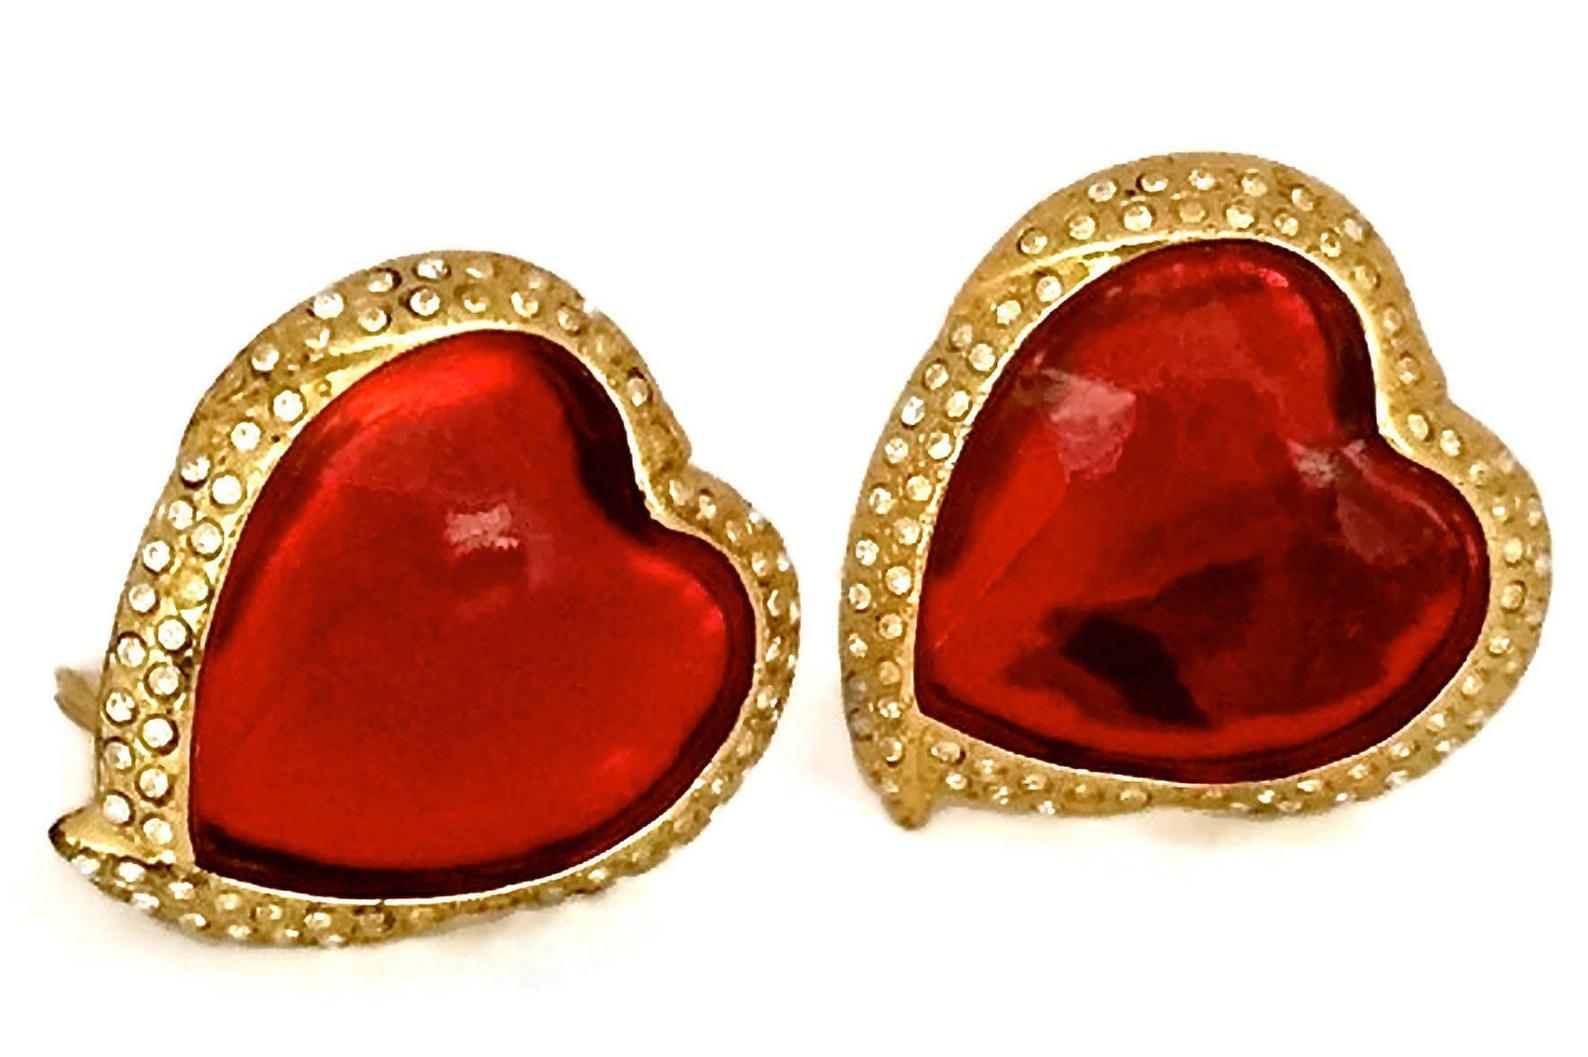 Vintage YSL Yves Saint Laurent Red Faceted Heart Rhinestone Earrings

Measurements:
Height: 1.5 inches (3.81 cm)
Width: 1.3 inches (3.4 cm)

Features:
- 100% Authentic Yves Saint Laurent.
- Raised faceted red heart surrounded with rhinestones.
-